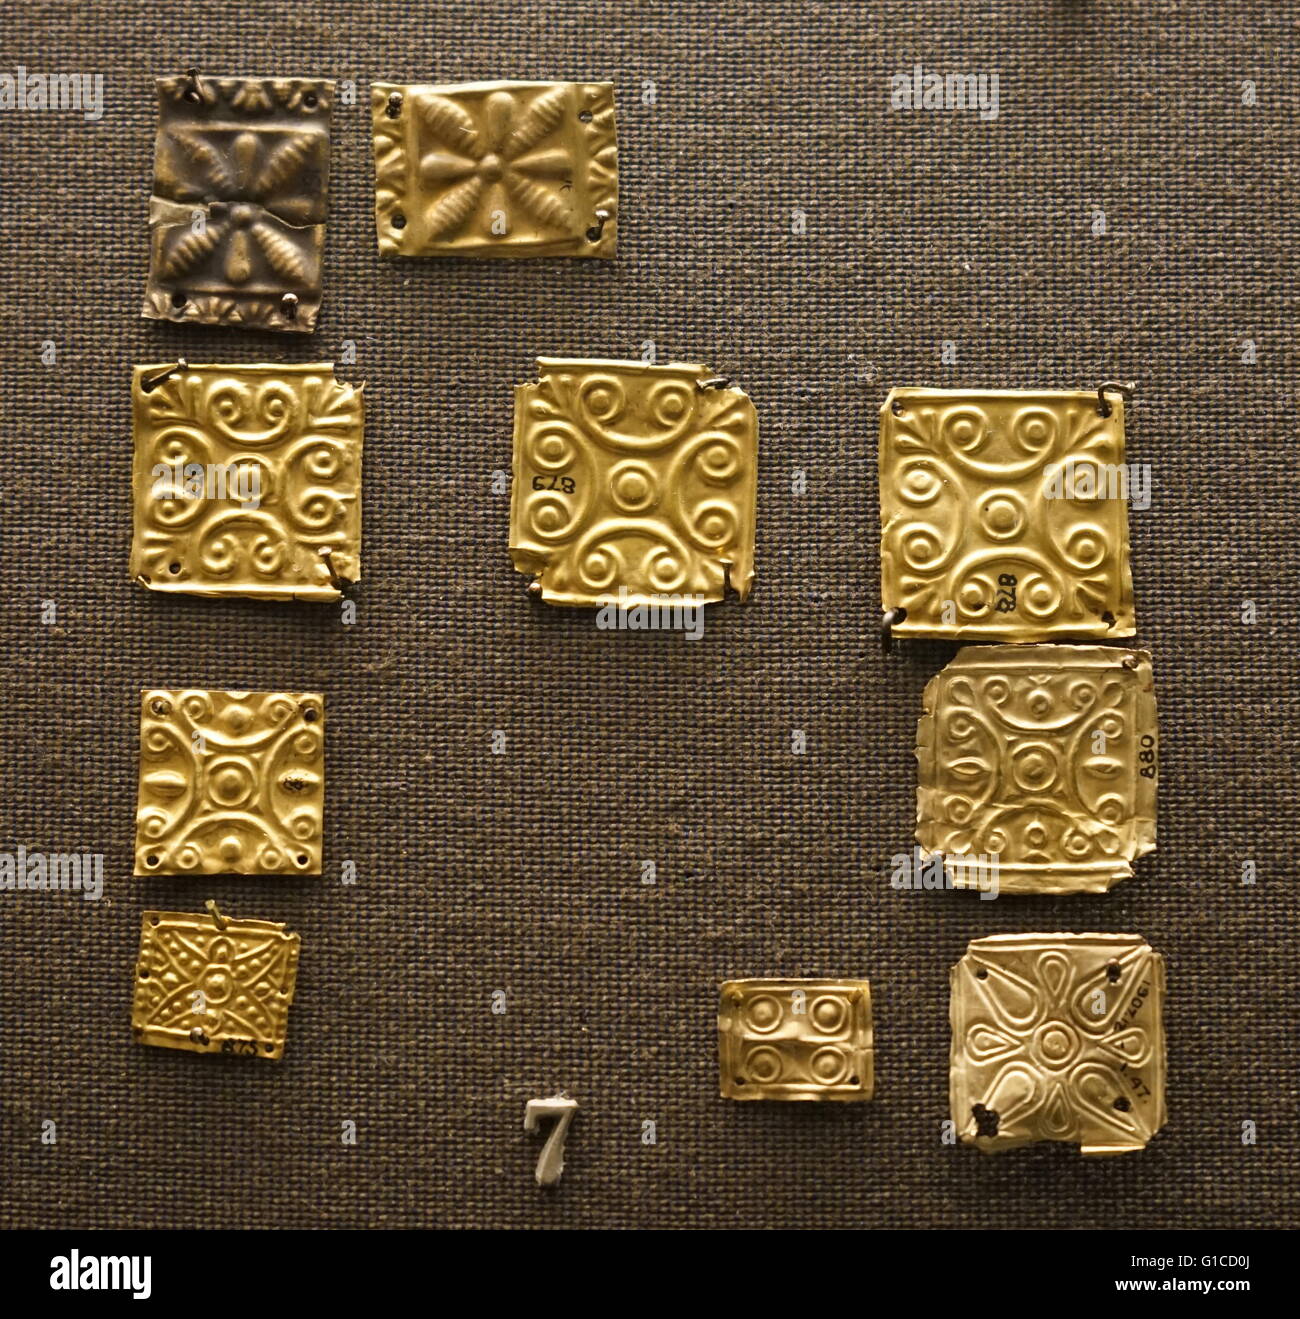 Embossed decorative gold tiles from ancient Greece. Stock Photo